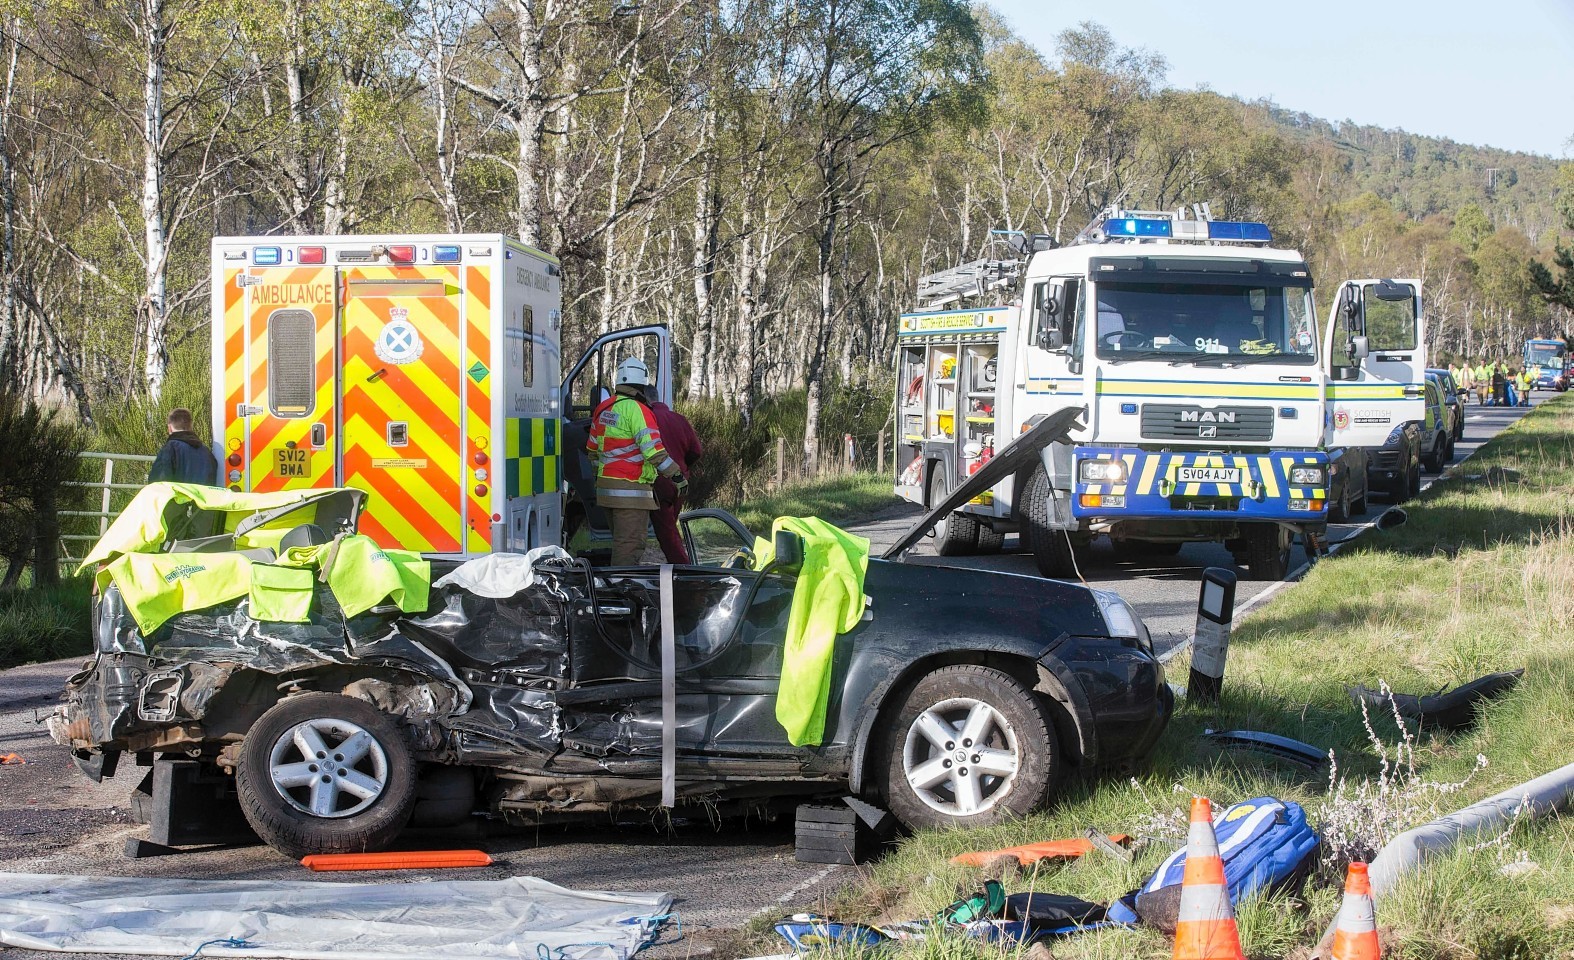 The Nissan X Trail and the ambulance after the collision at Dinnet